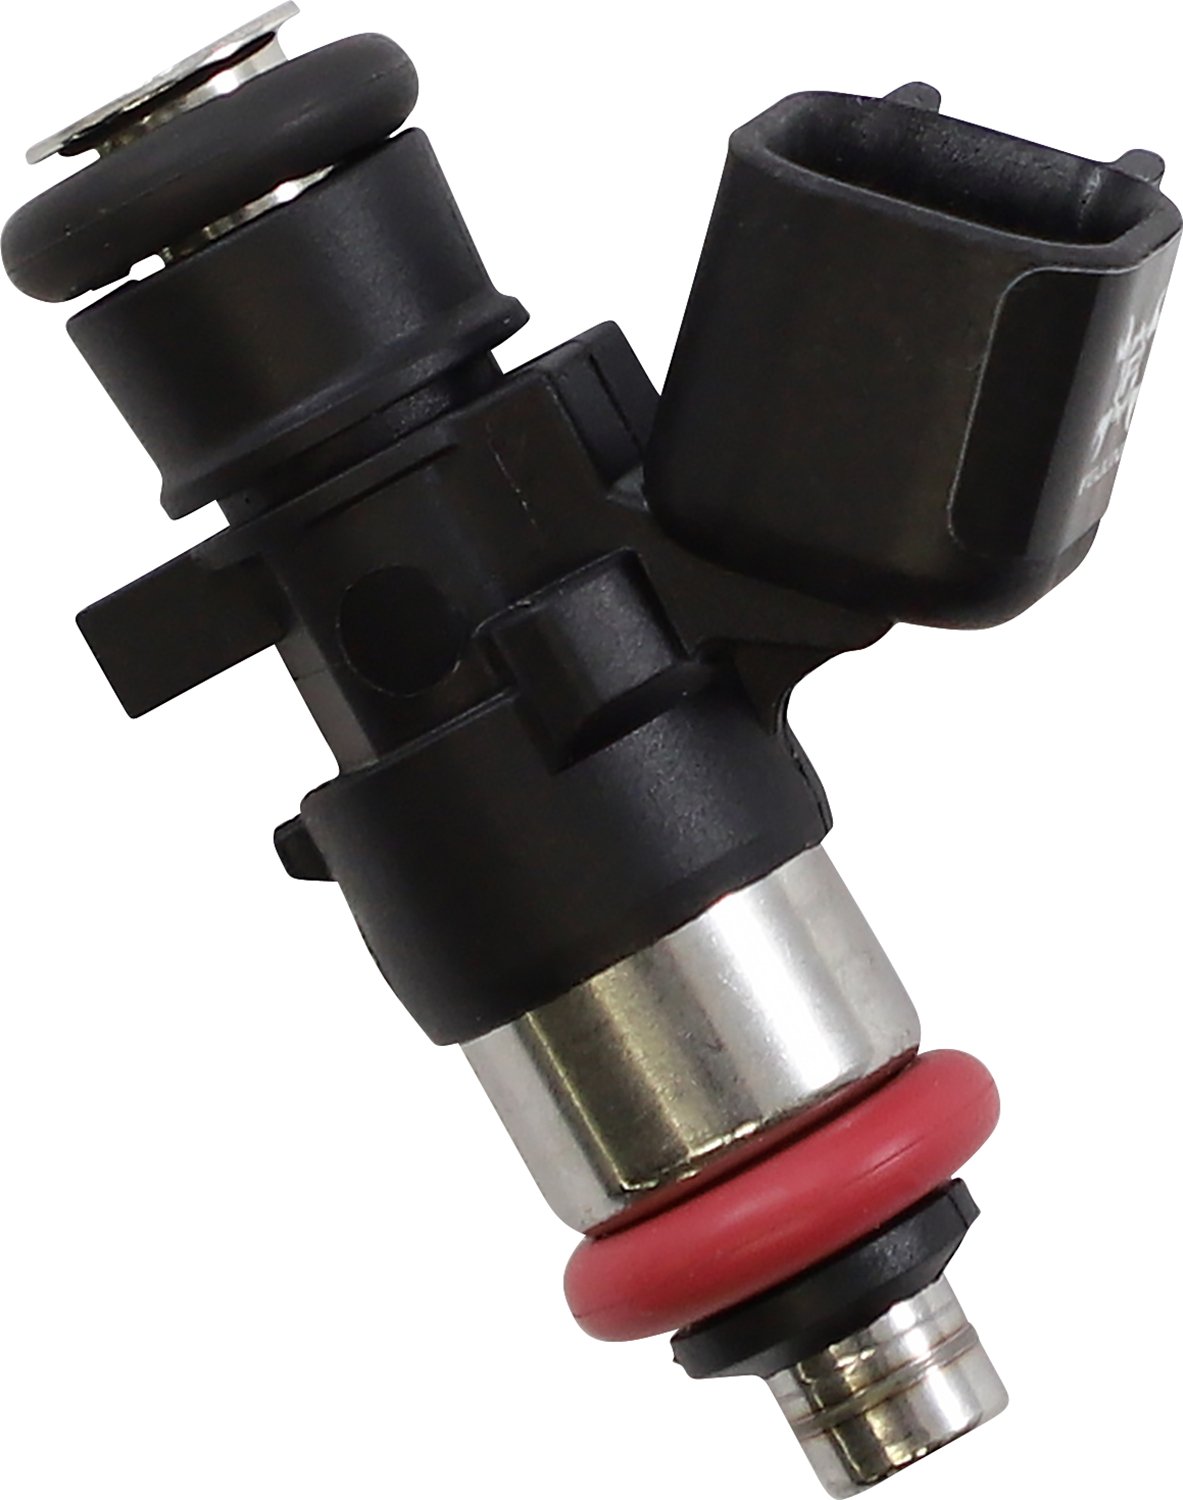 FEULING OIL PUMP CORP. EV-6 Series Fuel Injector - M8 - 4.4 9933 - Lucky Speed Shop